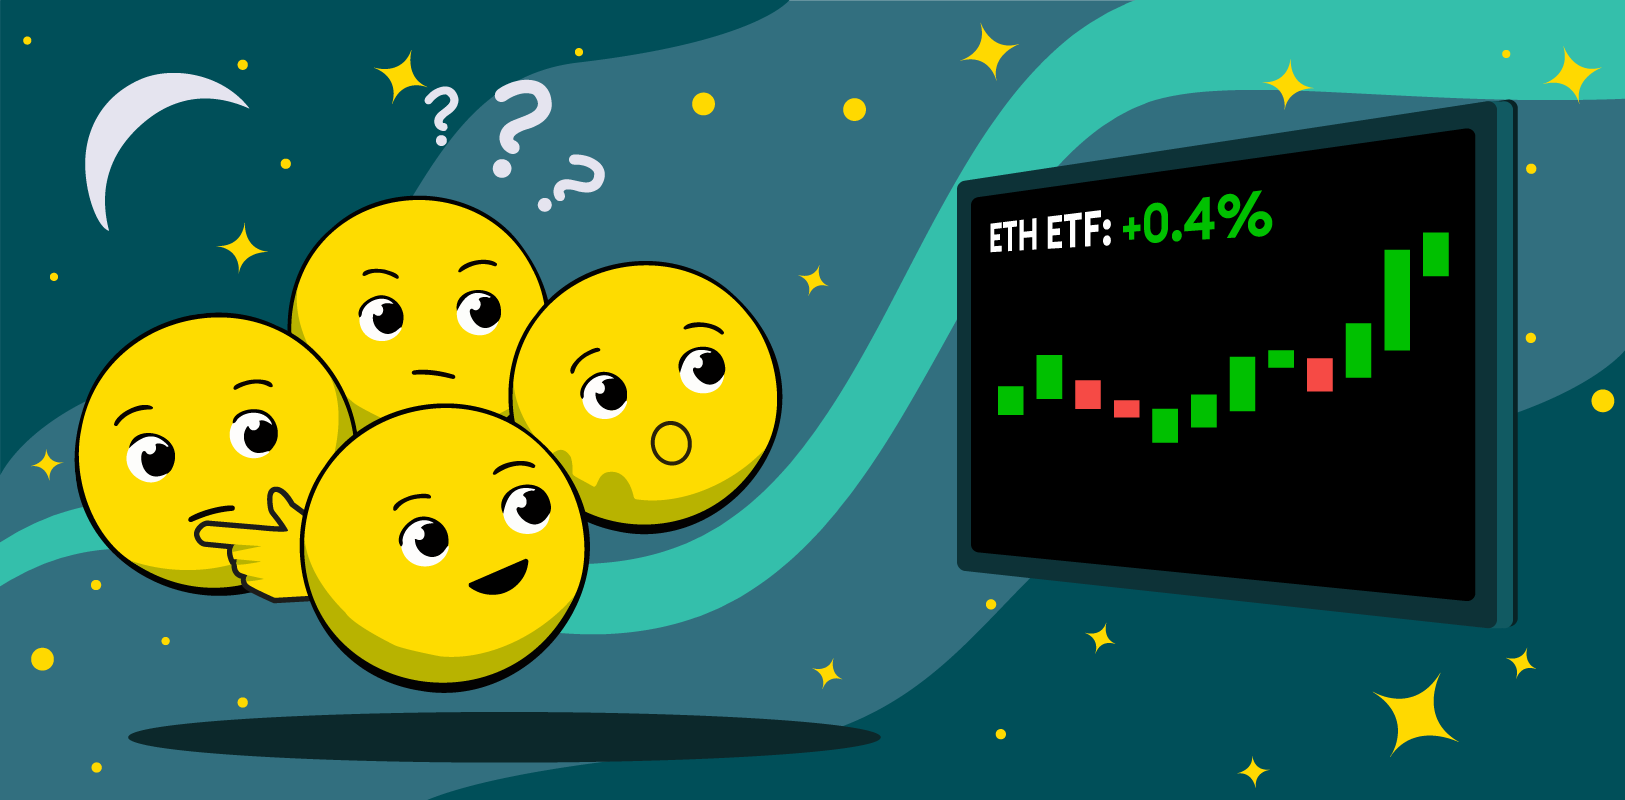 ETH ETFs are here: what is the public sentiment about them now